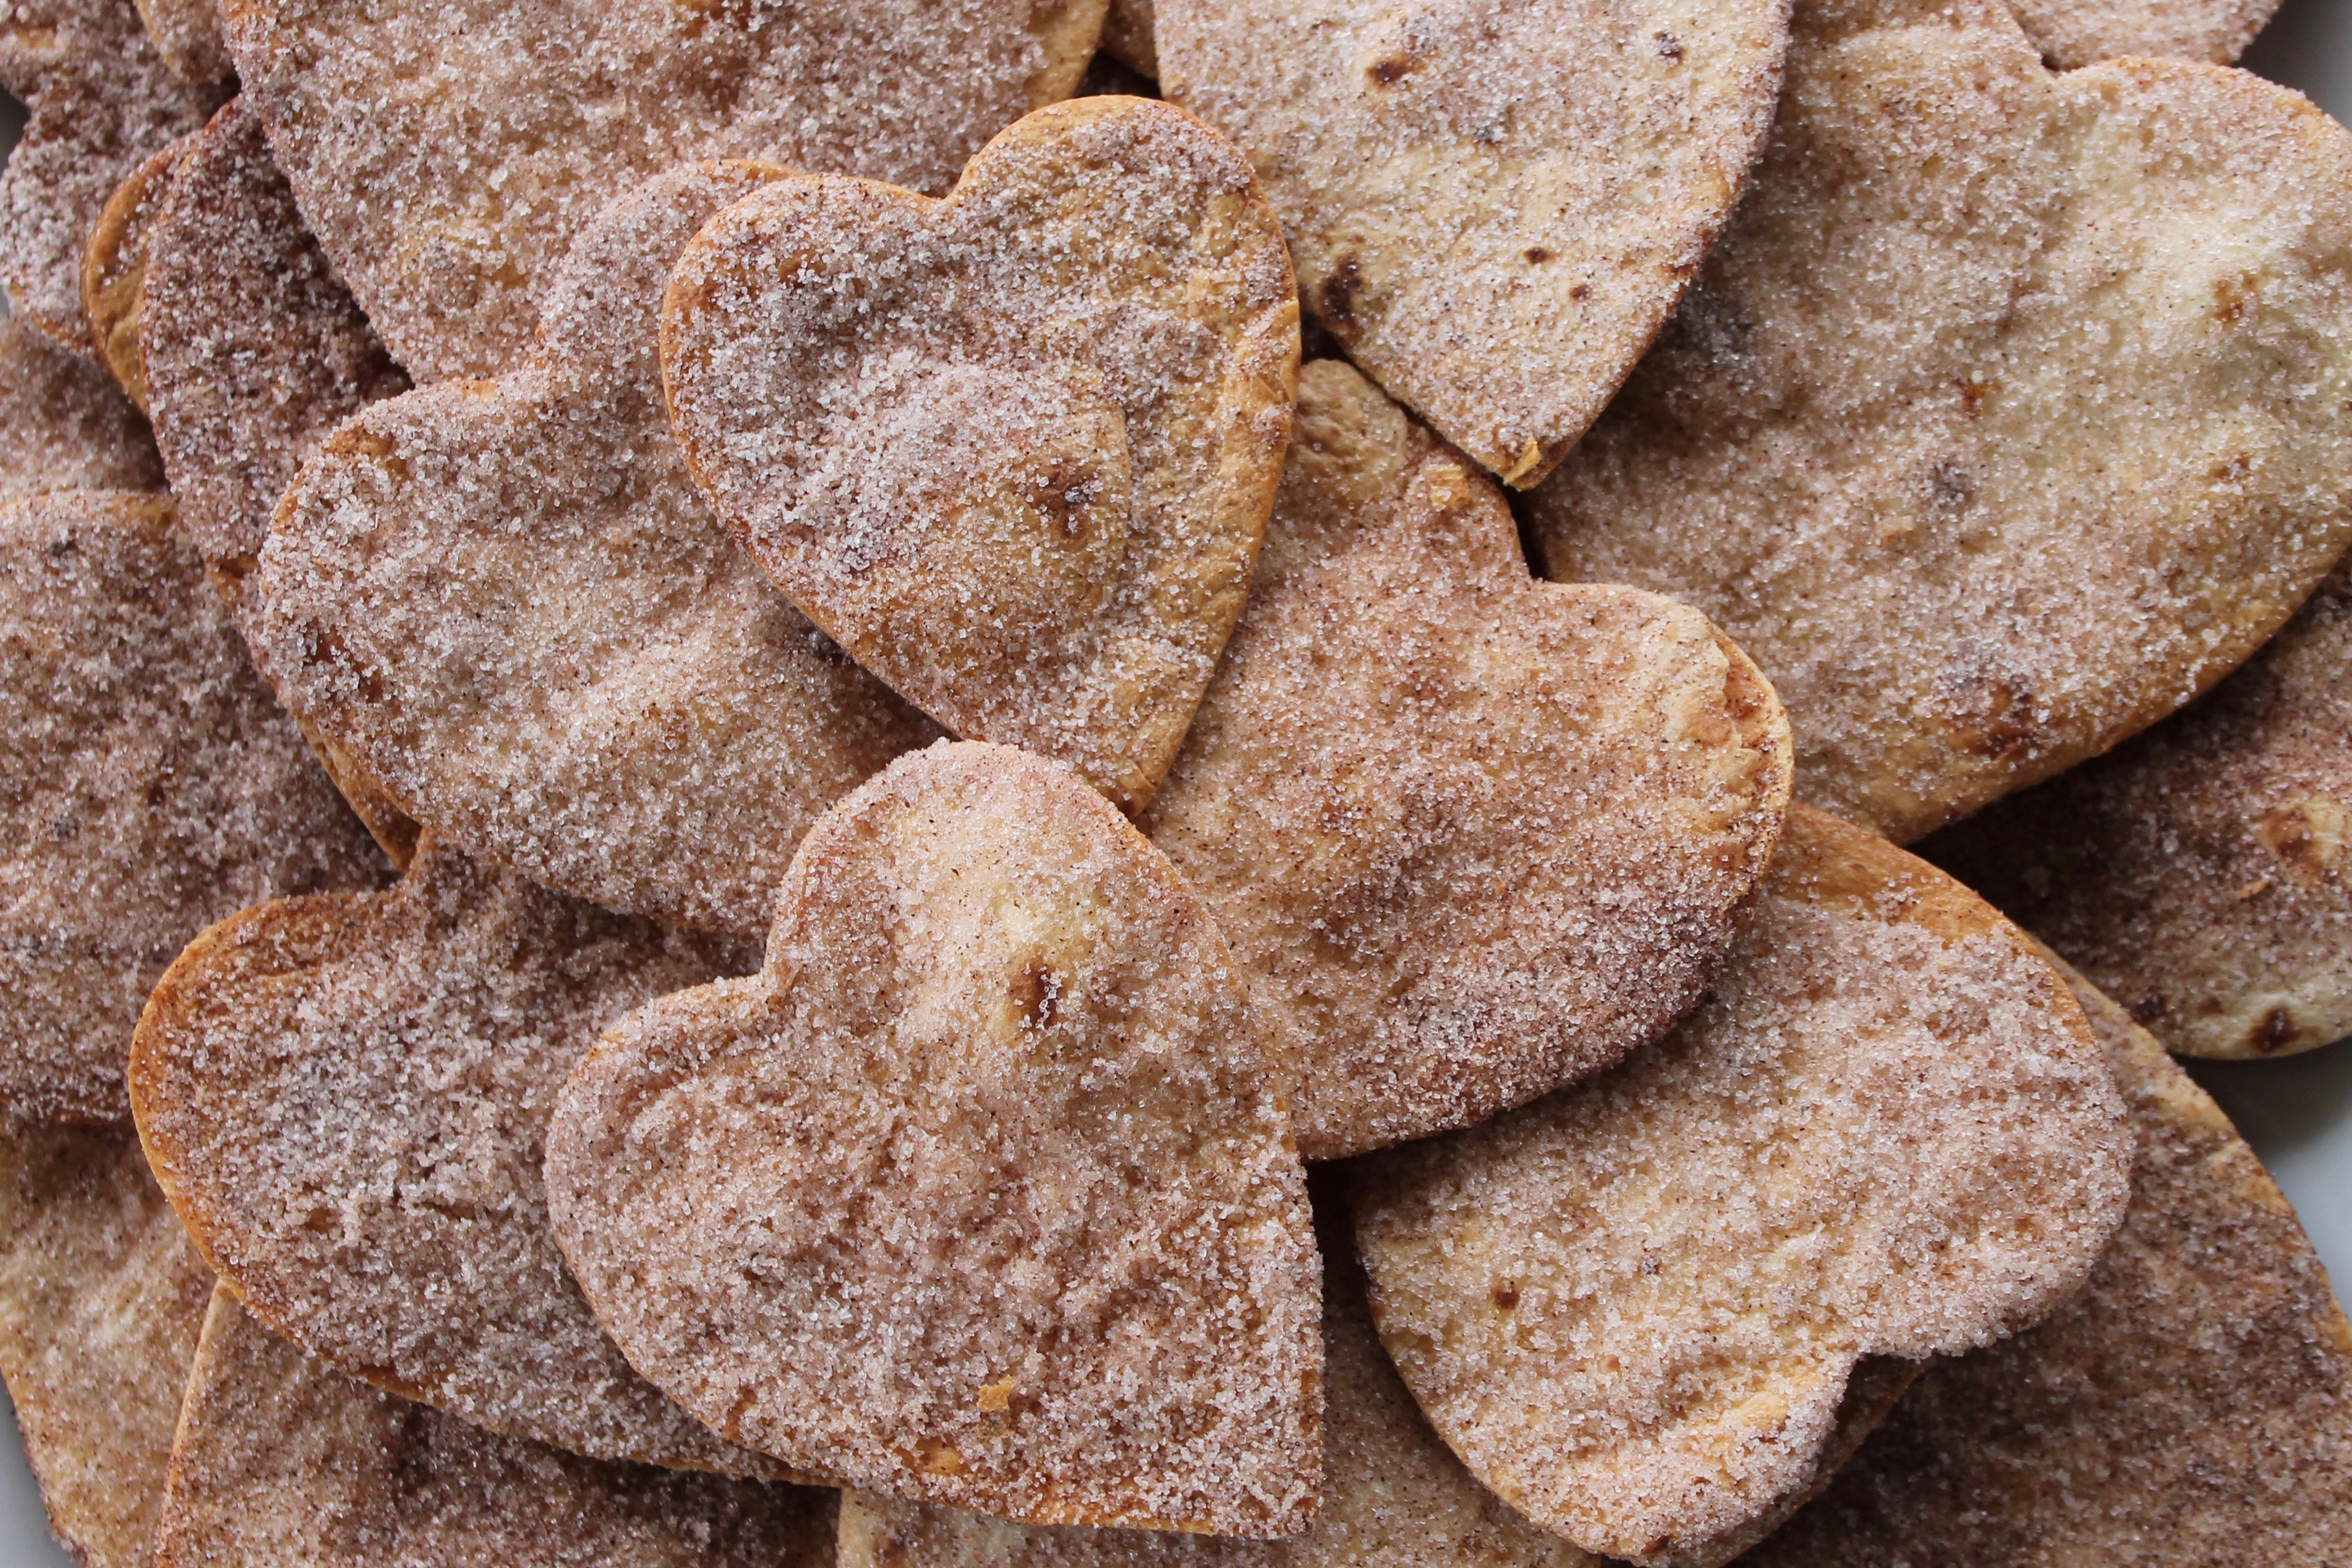 Heart shaped tortillas covered in cinnamon and sugar